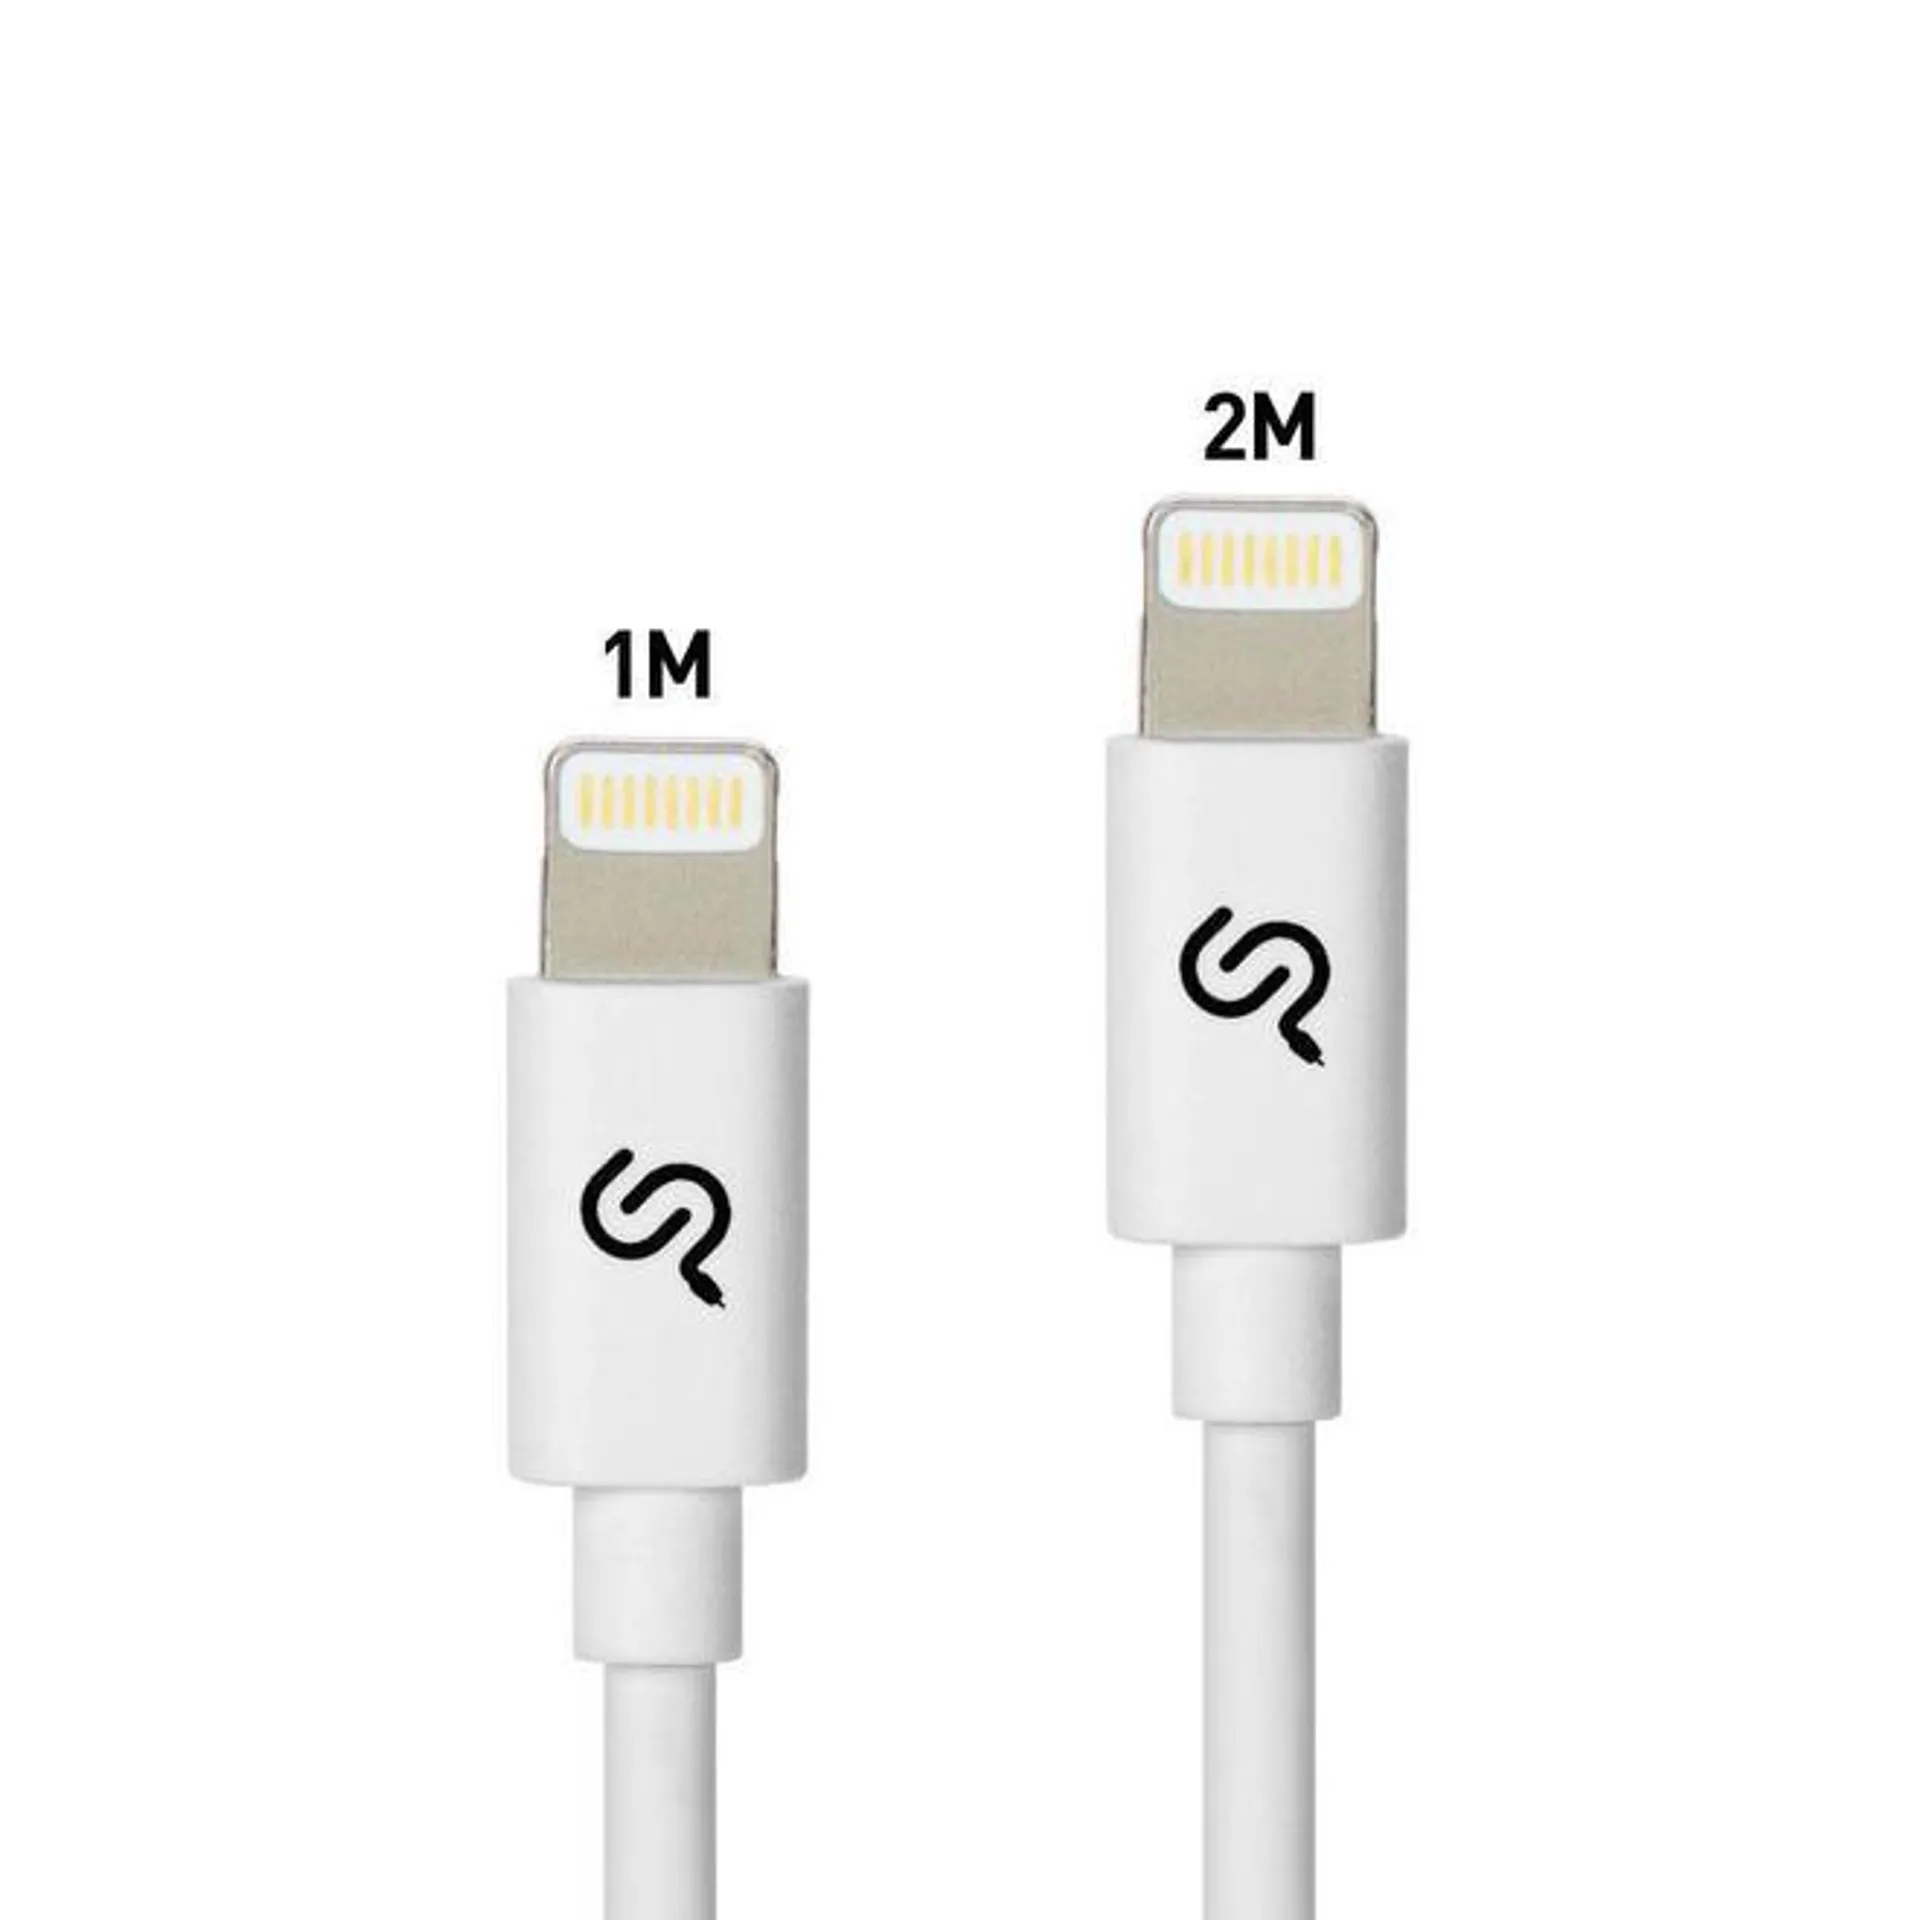 PrimeCables® Apple Certified Lightning Charge & Sync USB Cable for iPhone iPod iPad - 1M+2M